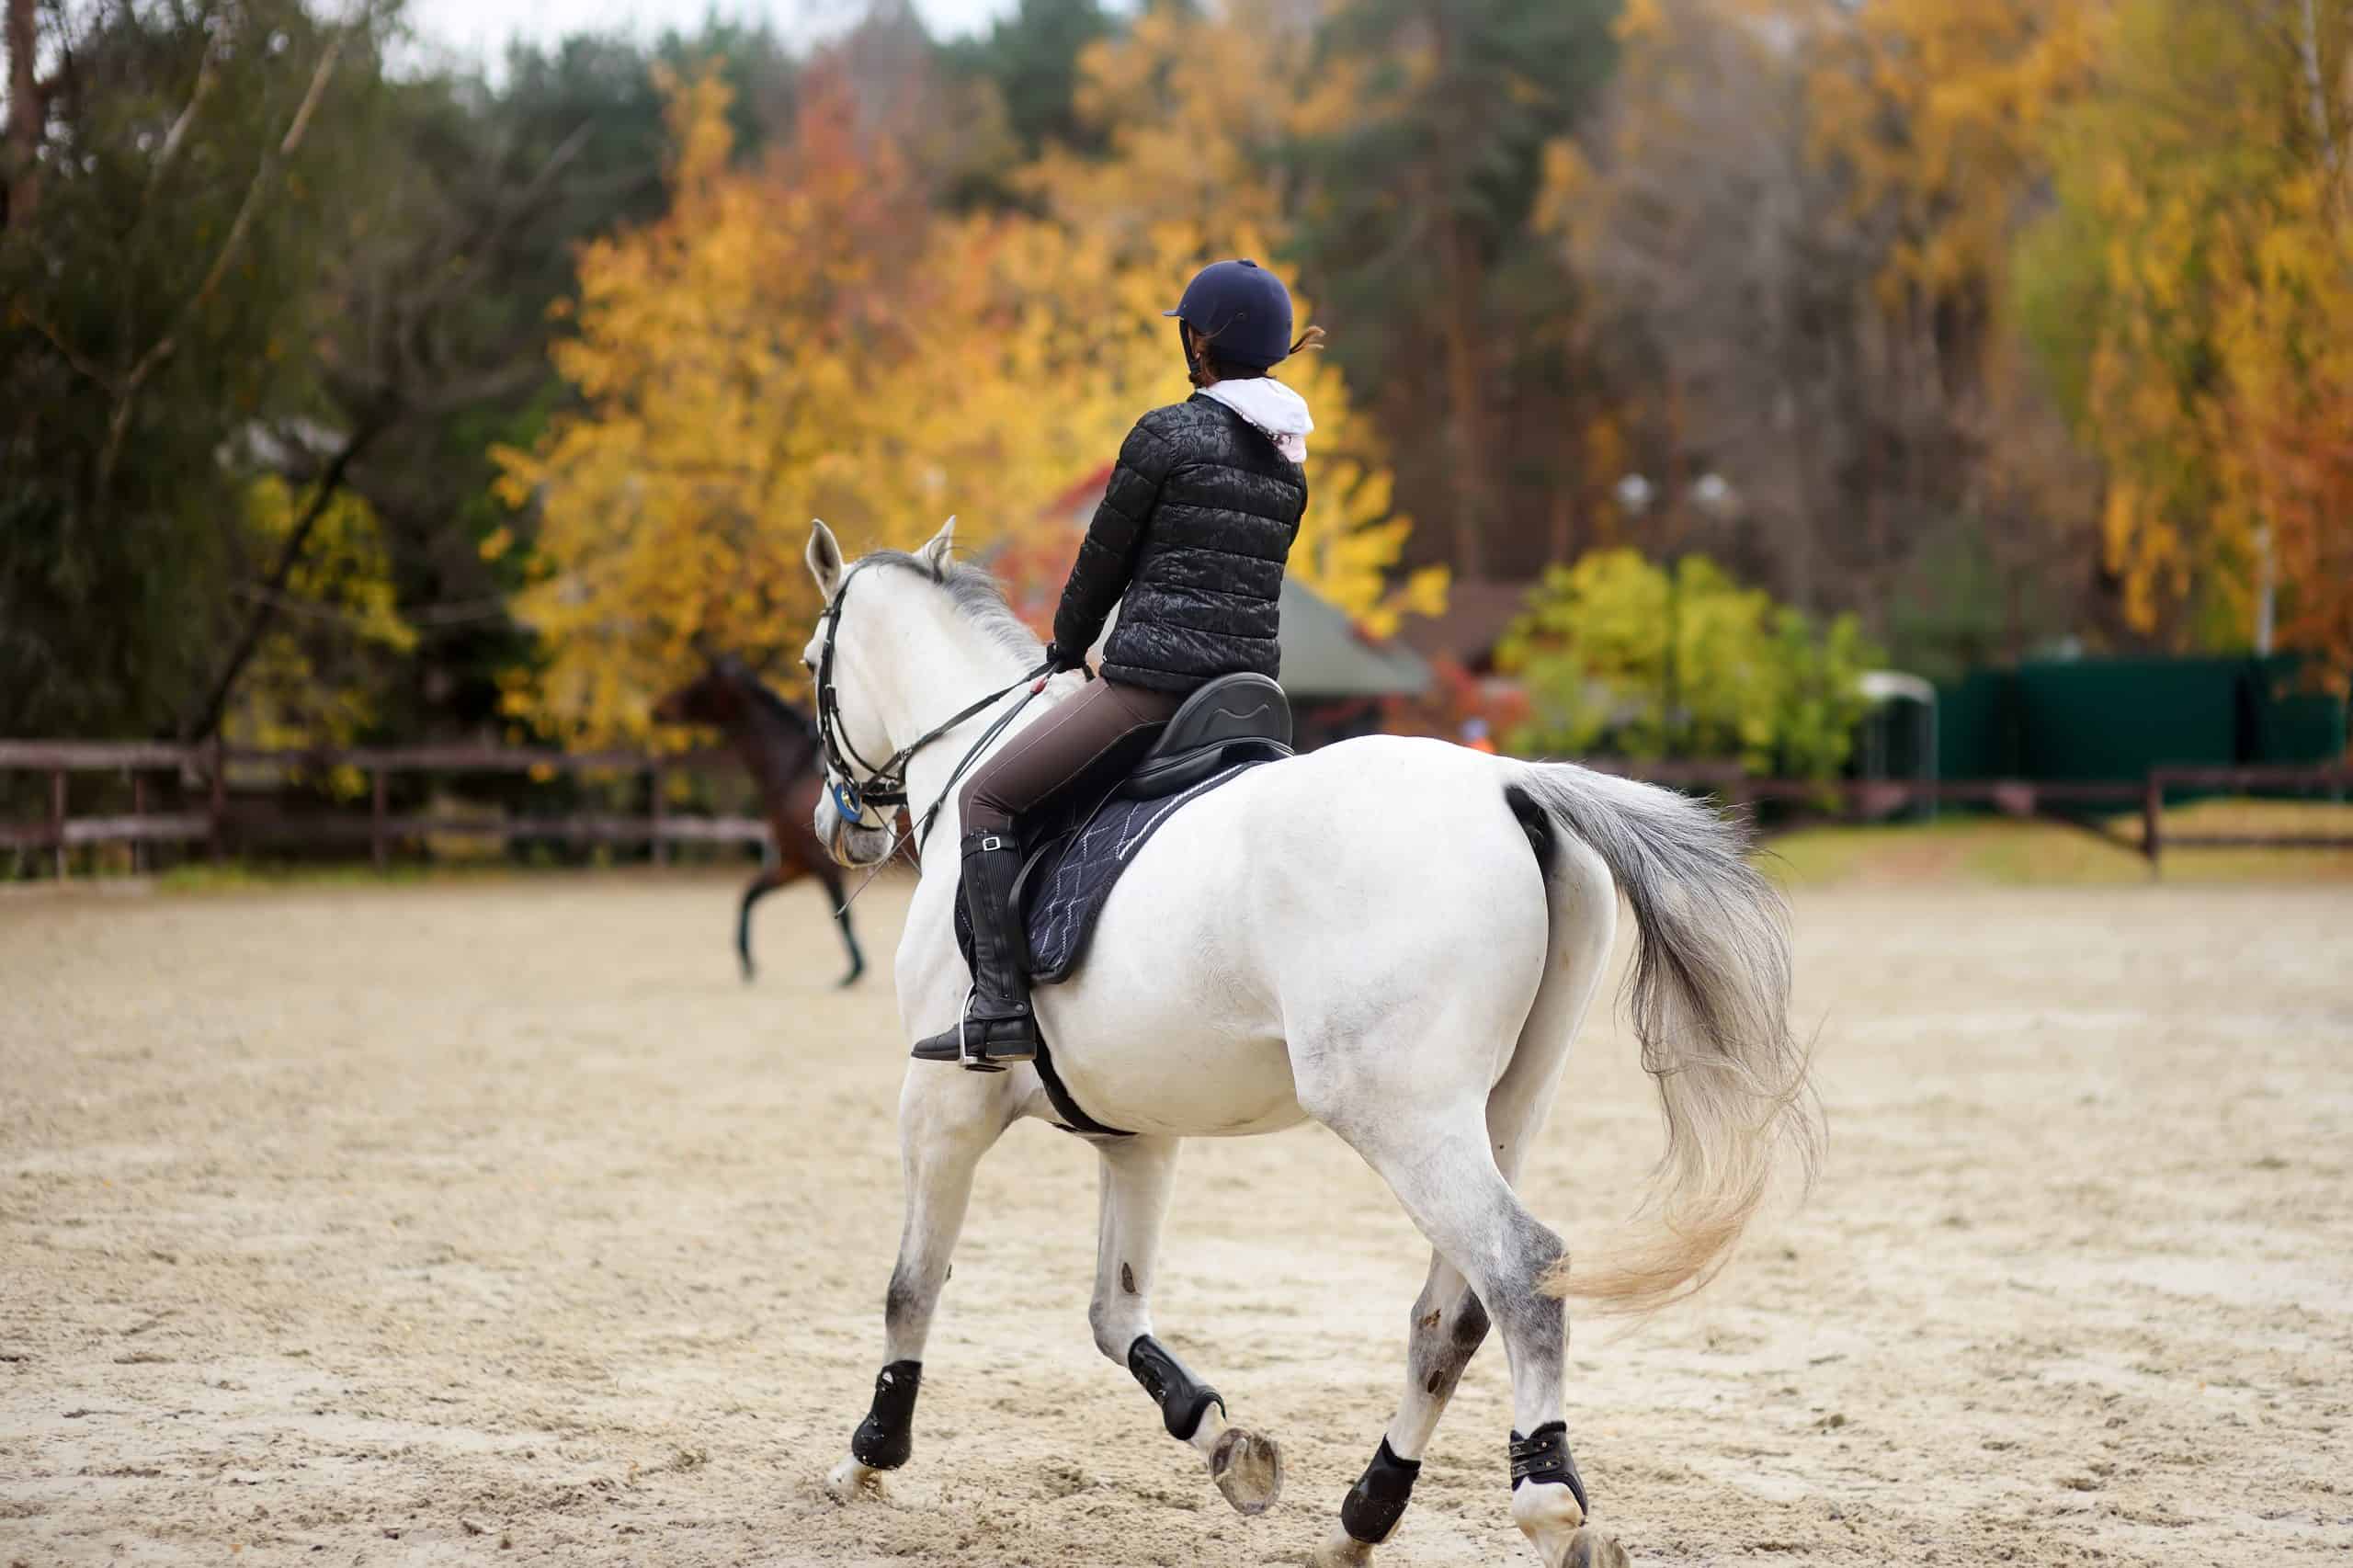 Girl rider trains in horse riding in equestrian club on autumn day. Unusual hobby of urban living.